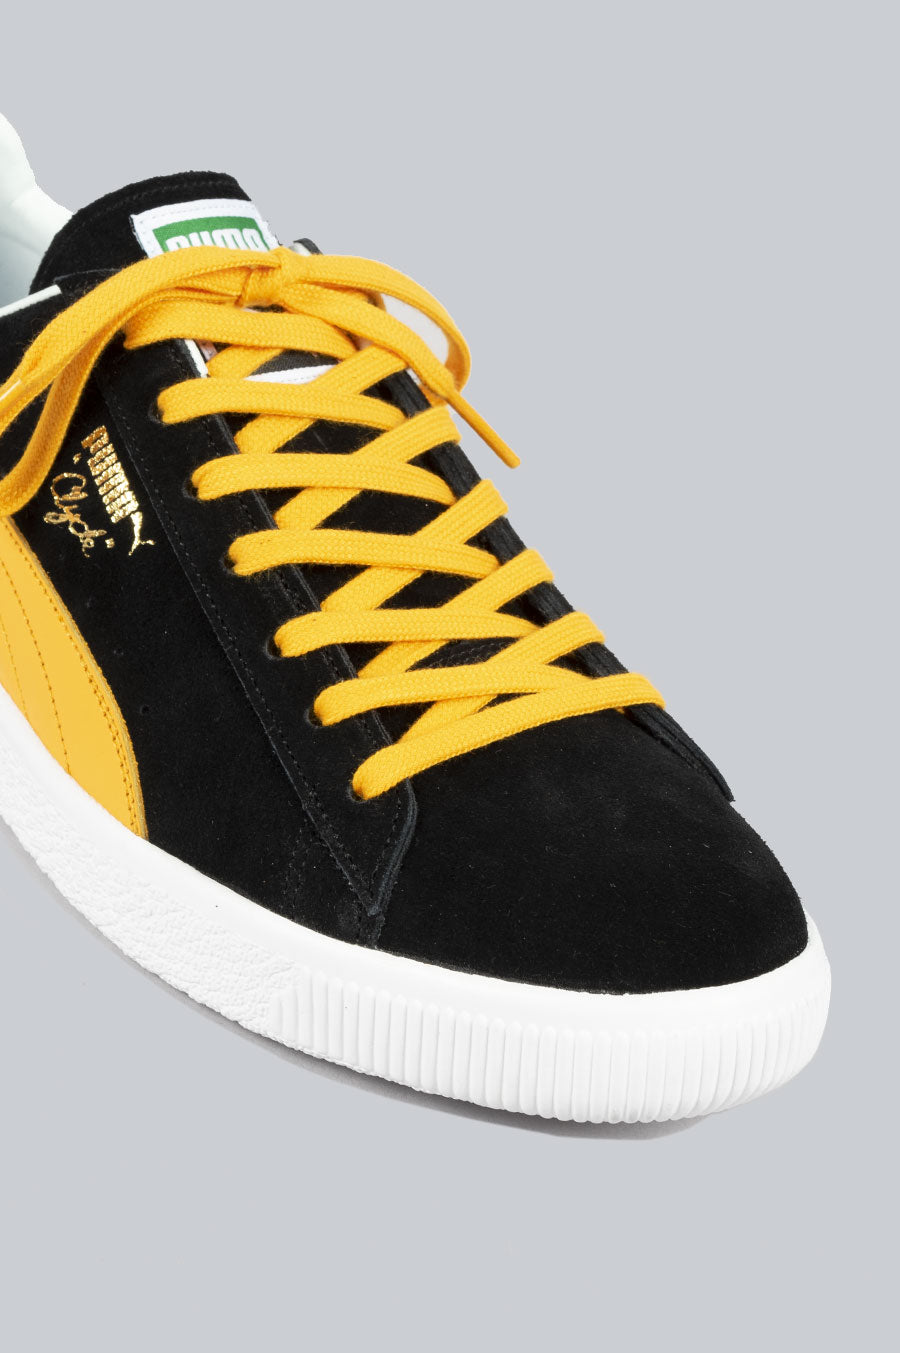 PUMA CLYDE CLYDEZILLA IN JAPAN BLACK YELLOW – BLENDS